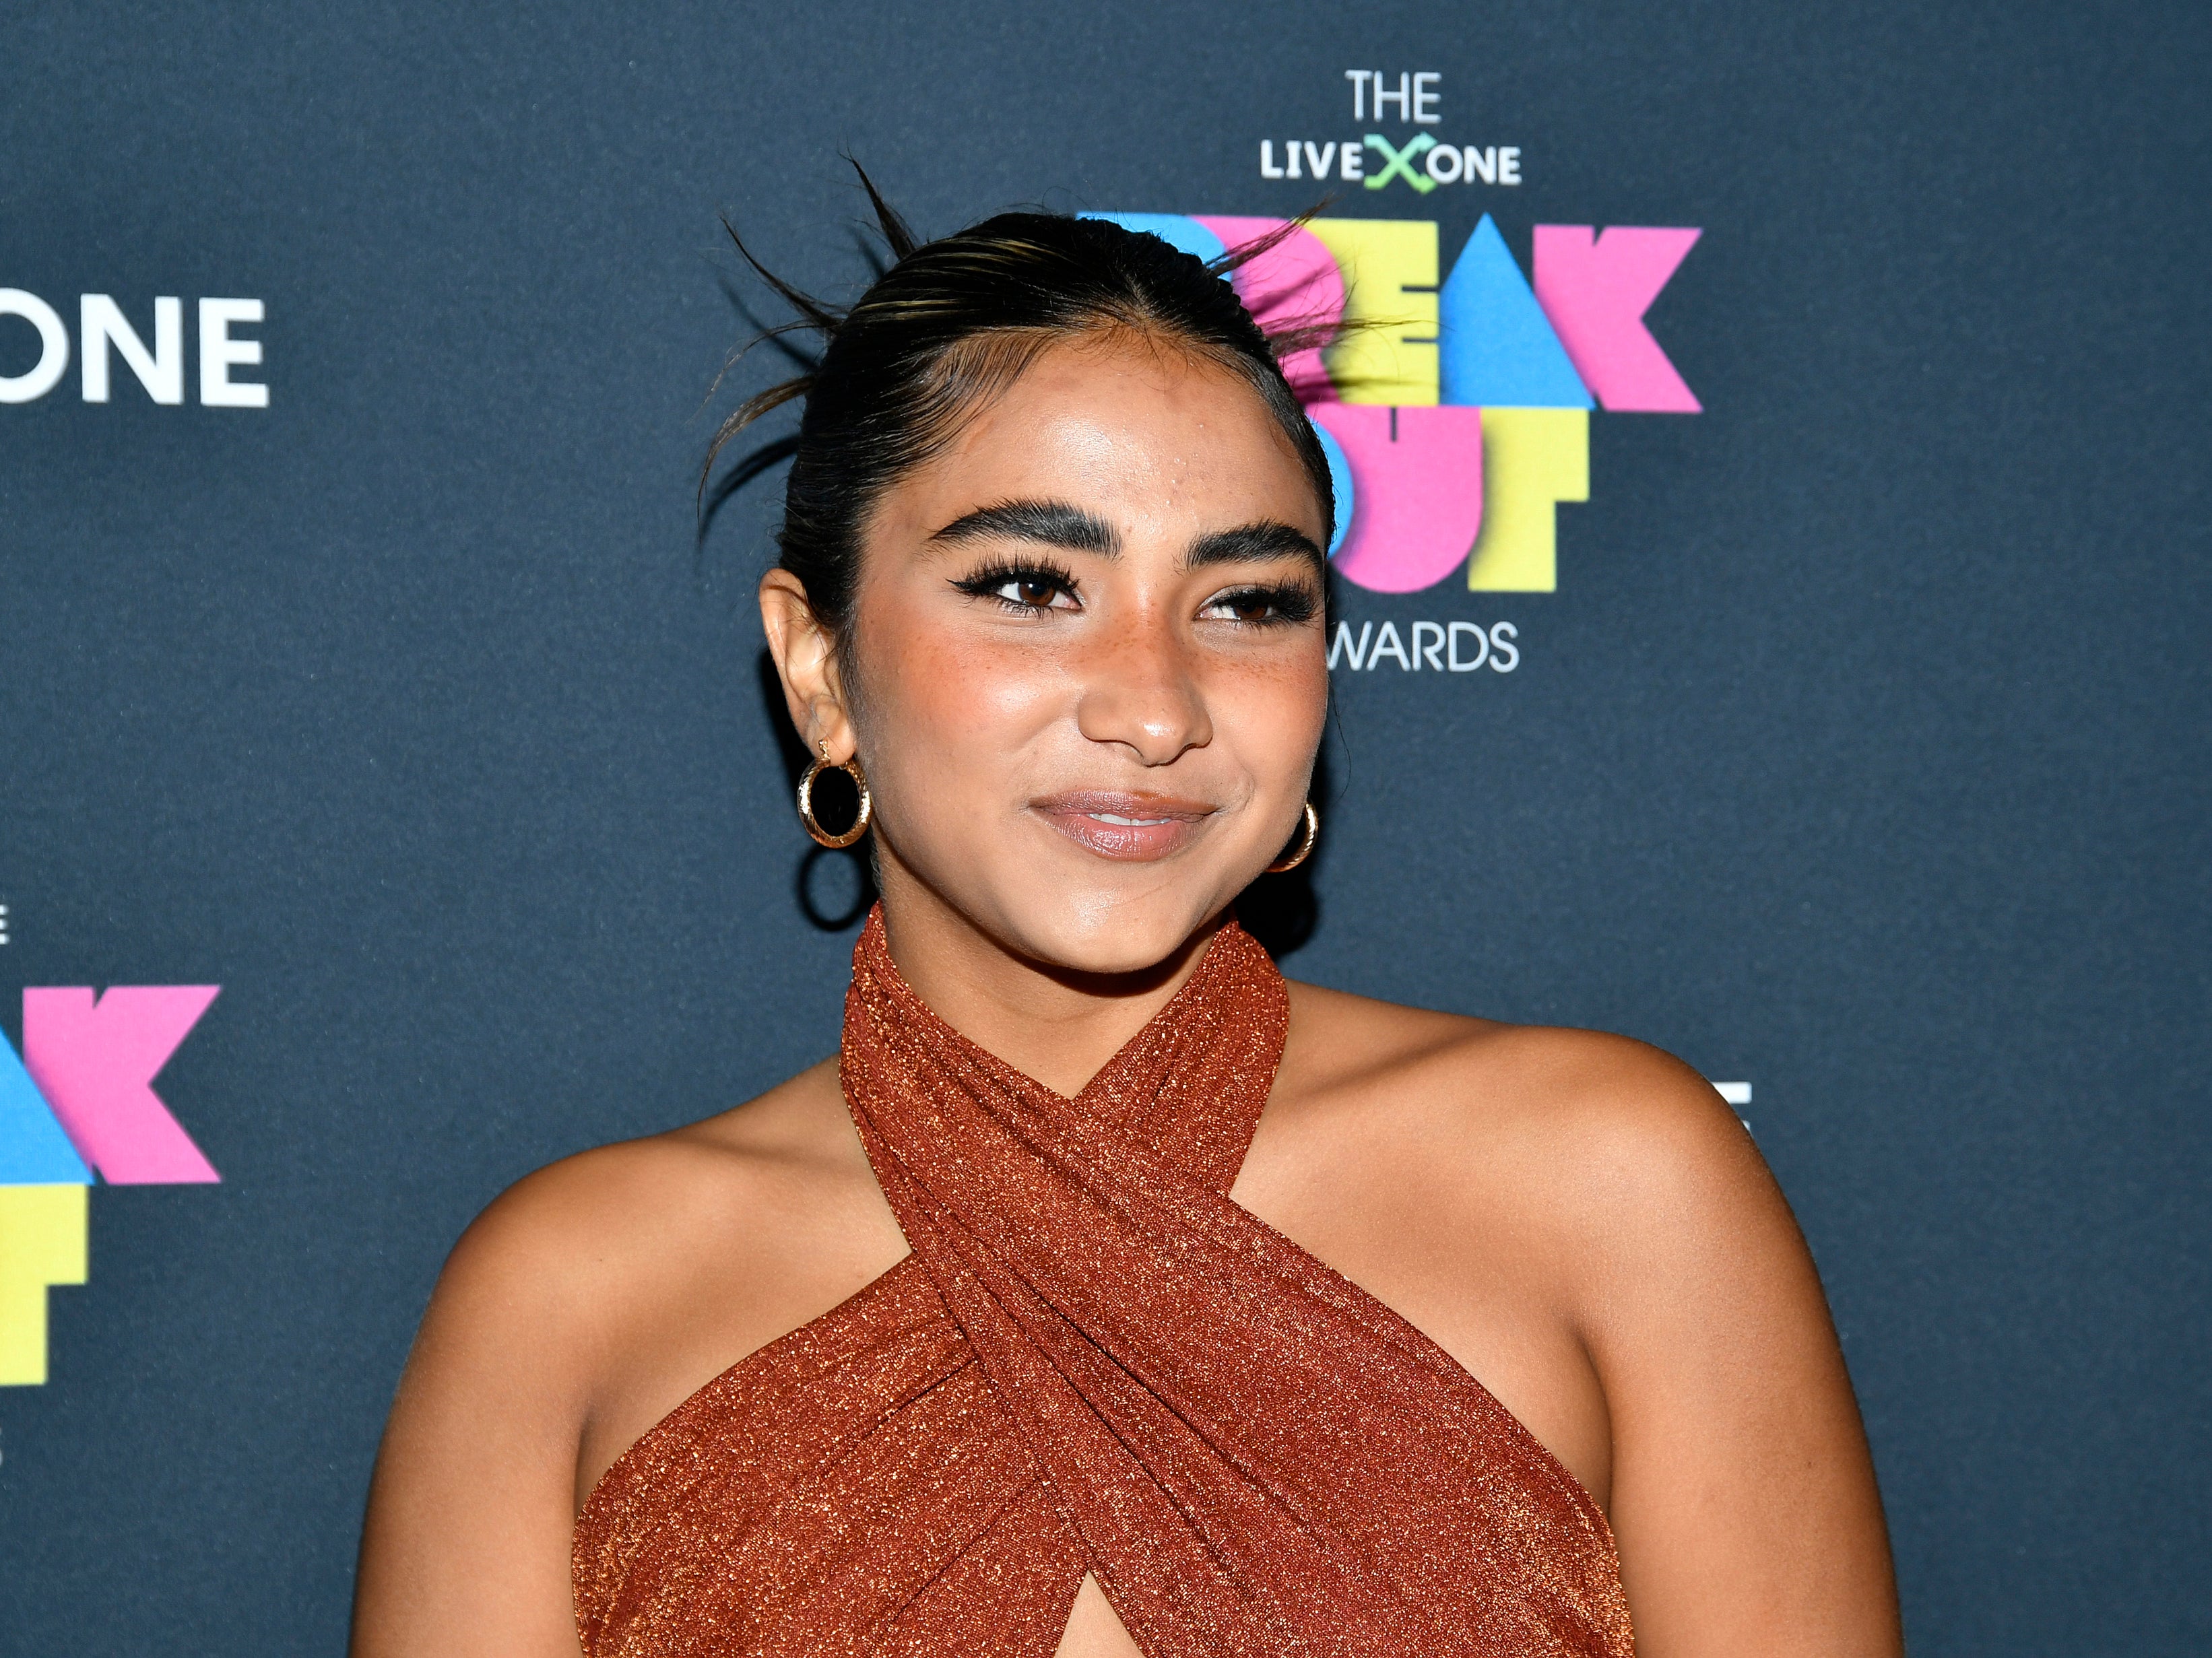 Sienna Mae Gomez attends the 2021 Breakout Awards at Universal Studios Hollywood on December 08, 2021